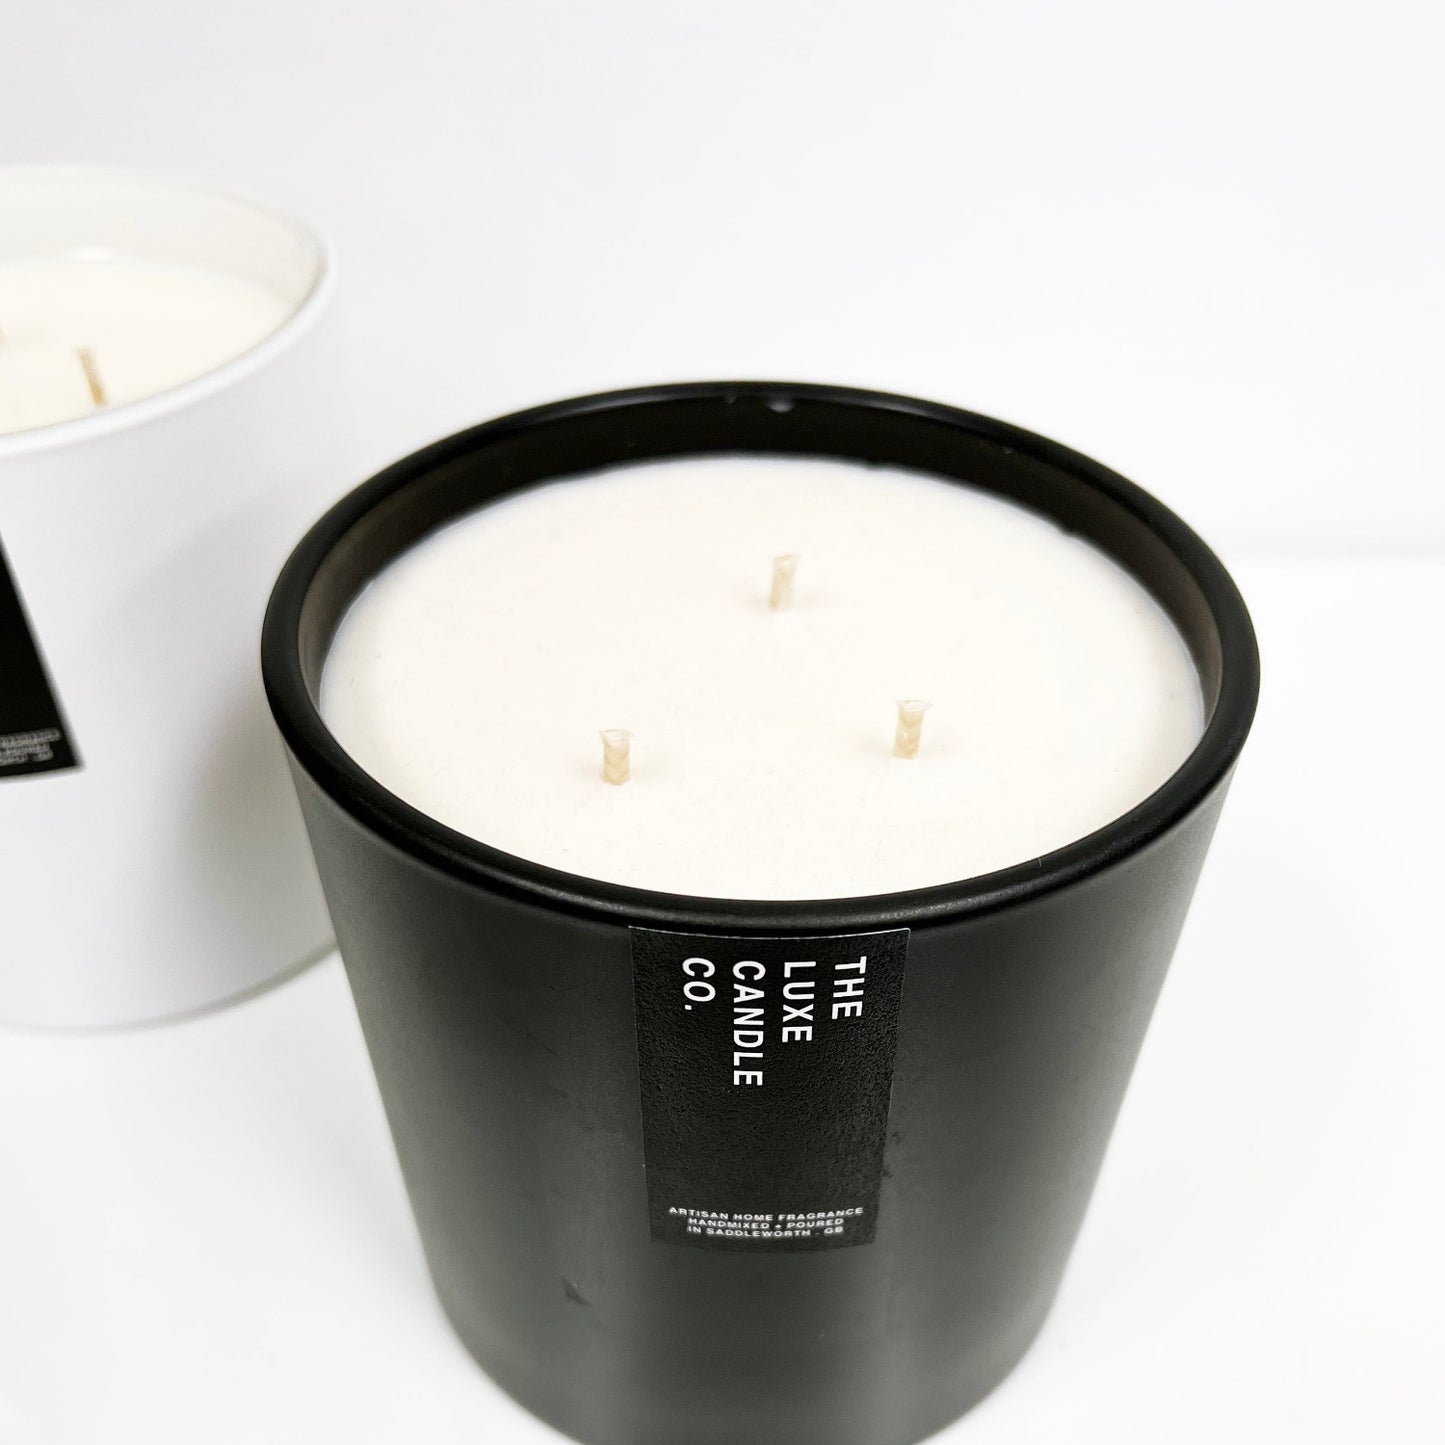 Black and white 3 wick candles hand poured with scented soy wax by The Luxe Co